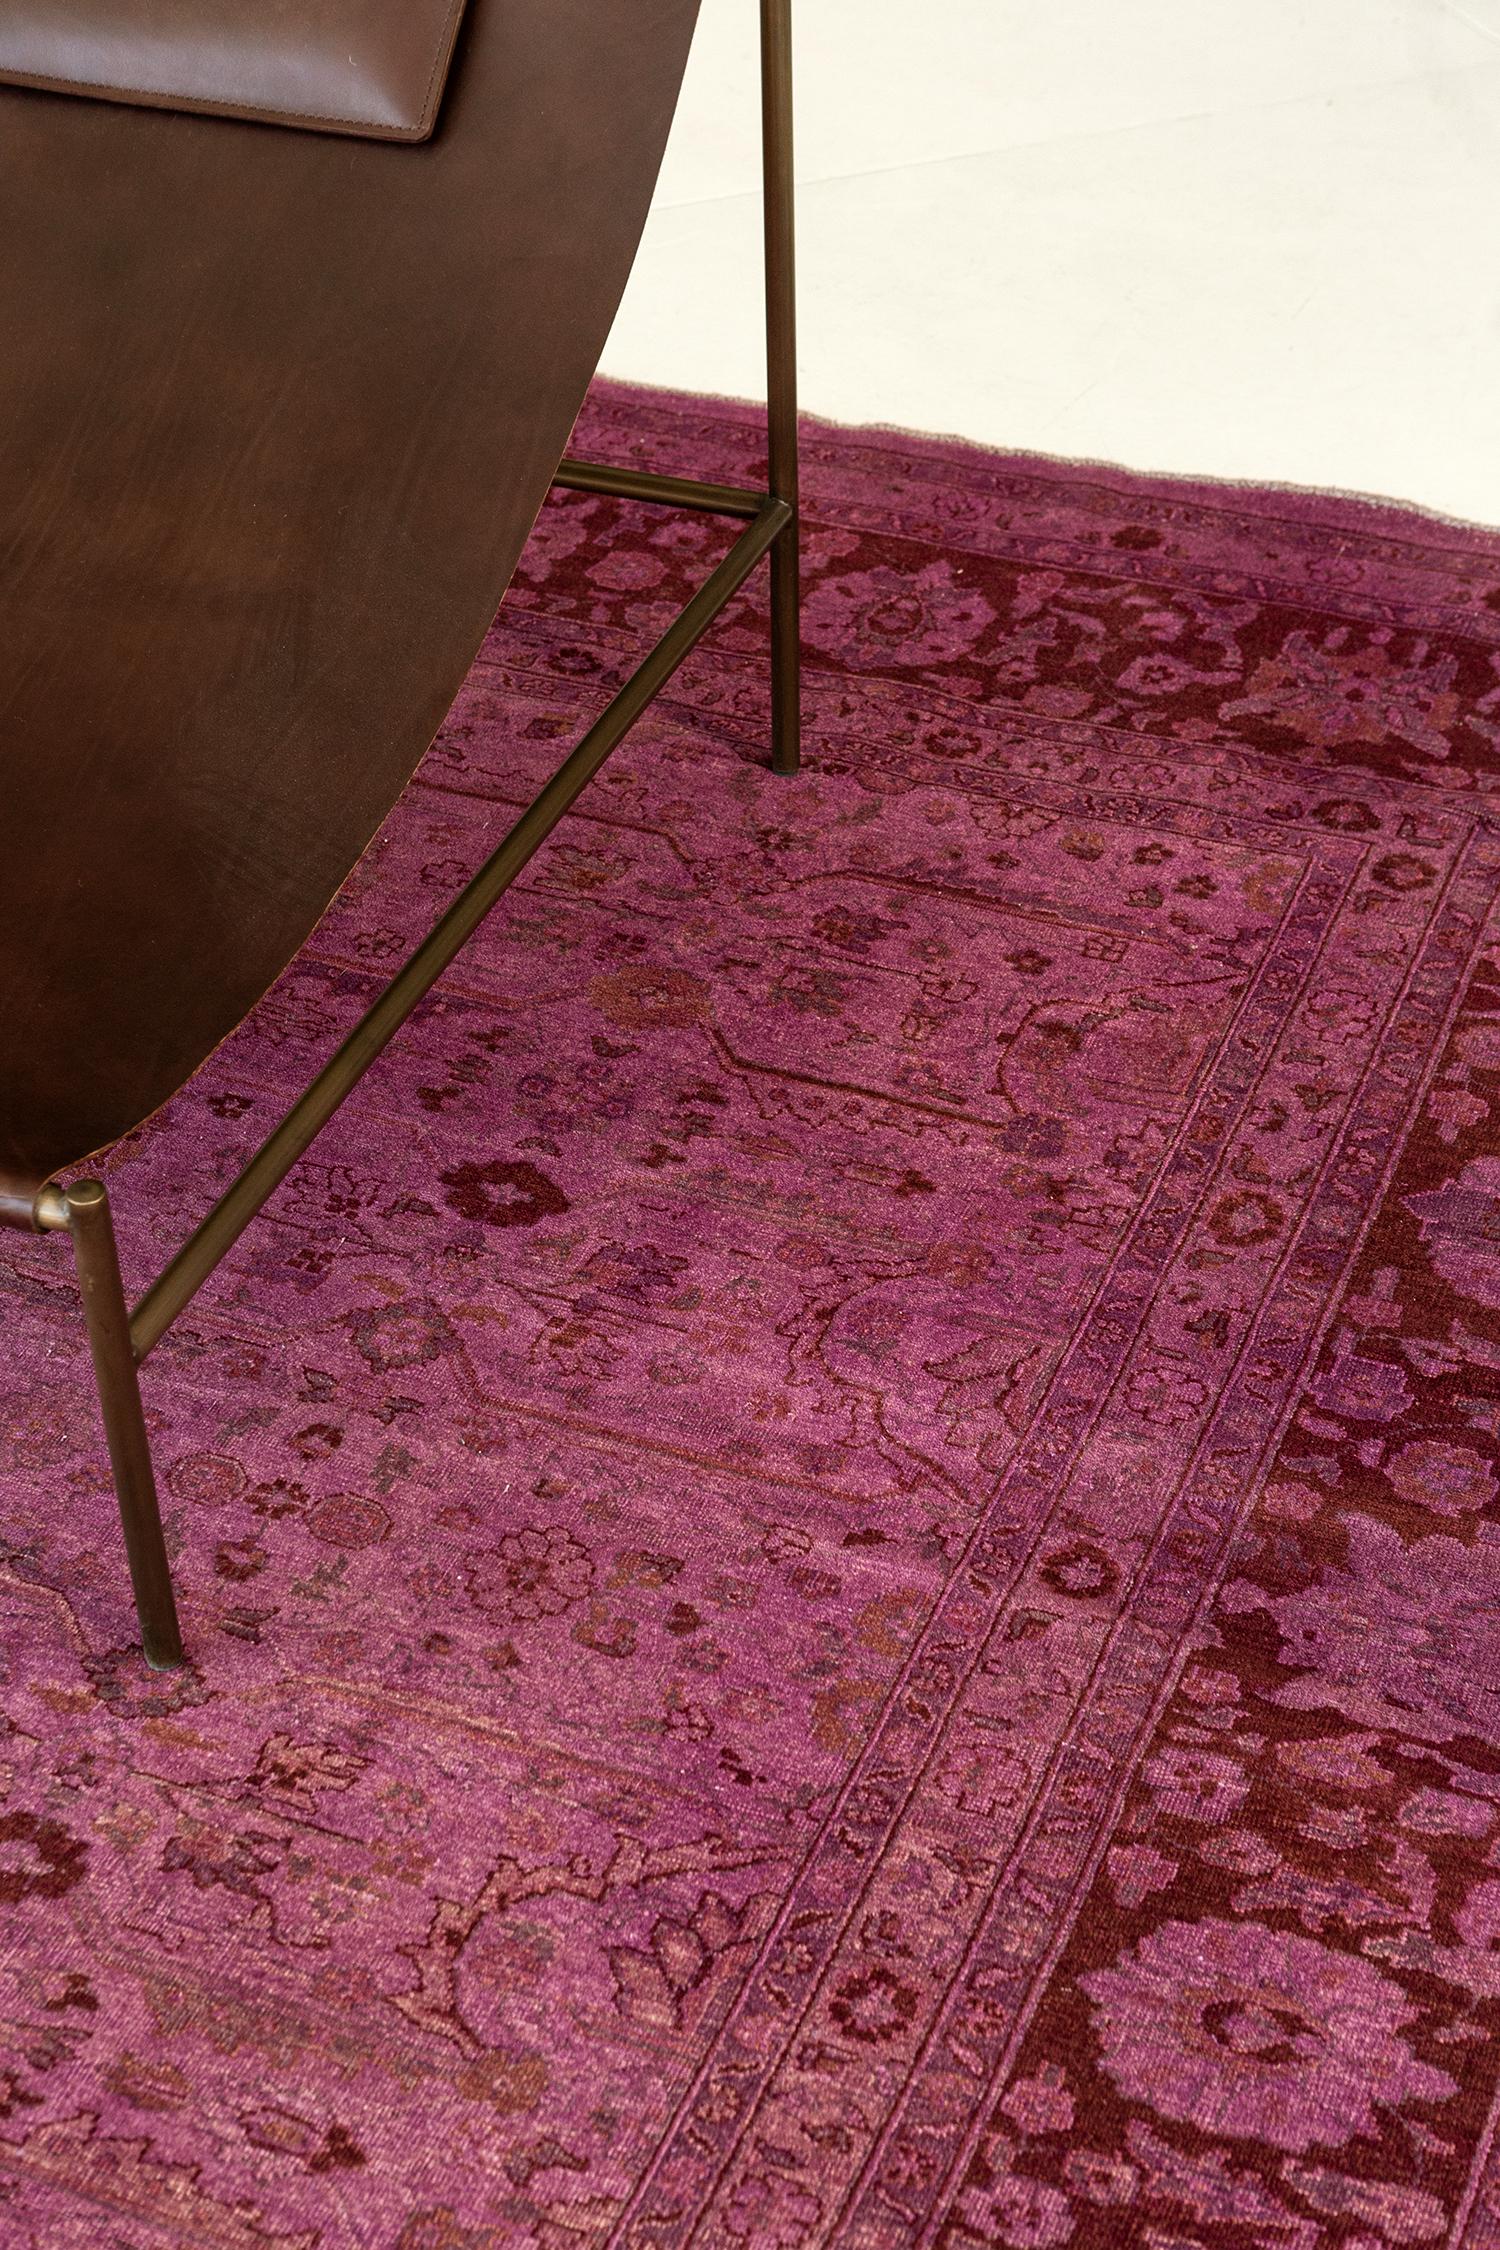 A gorgeously overdyed vintage style rug that is deeply saturated in a mesmerizing orchid tone. This versatile rug will add a regal touch and extraordinary striking appeal to your space. From contemporary or modern to traditional interiors, its